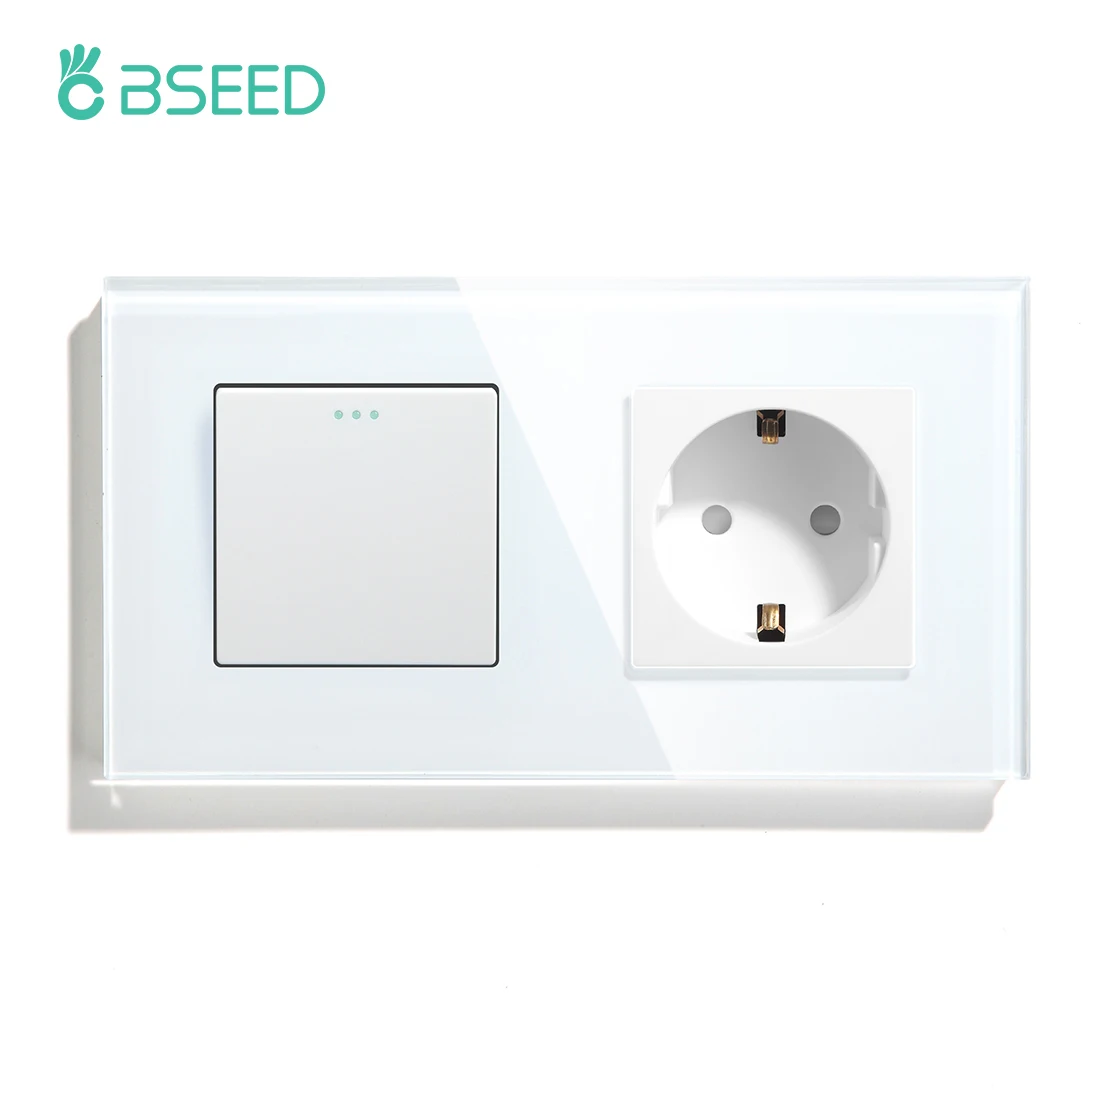 

Bseed Button Light Switch 1 Gang With EU Russia Standard Socket Plug Black White Gold Crystal Glass Panel Switch 16A 157mm